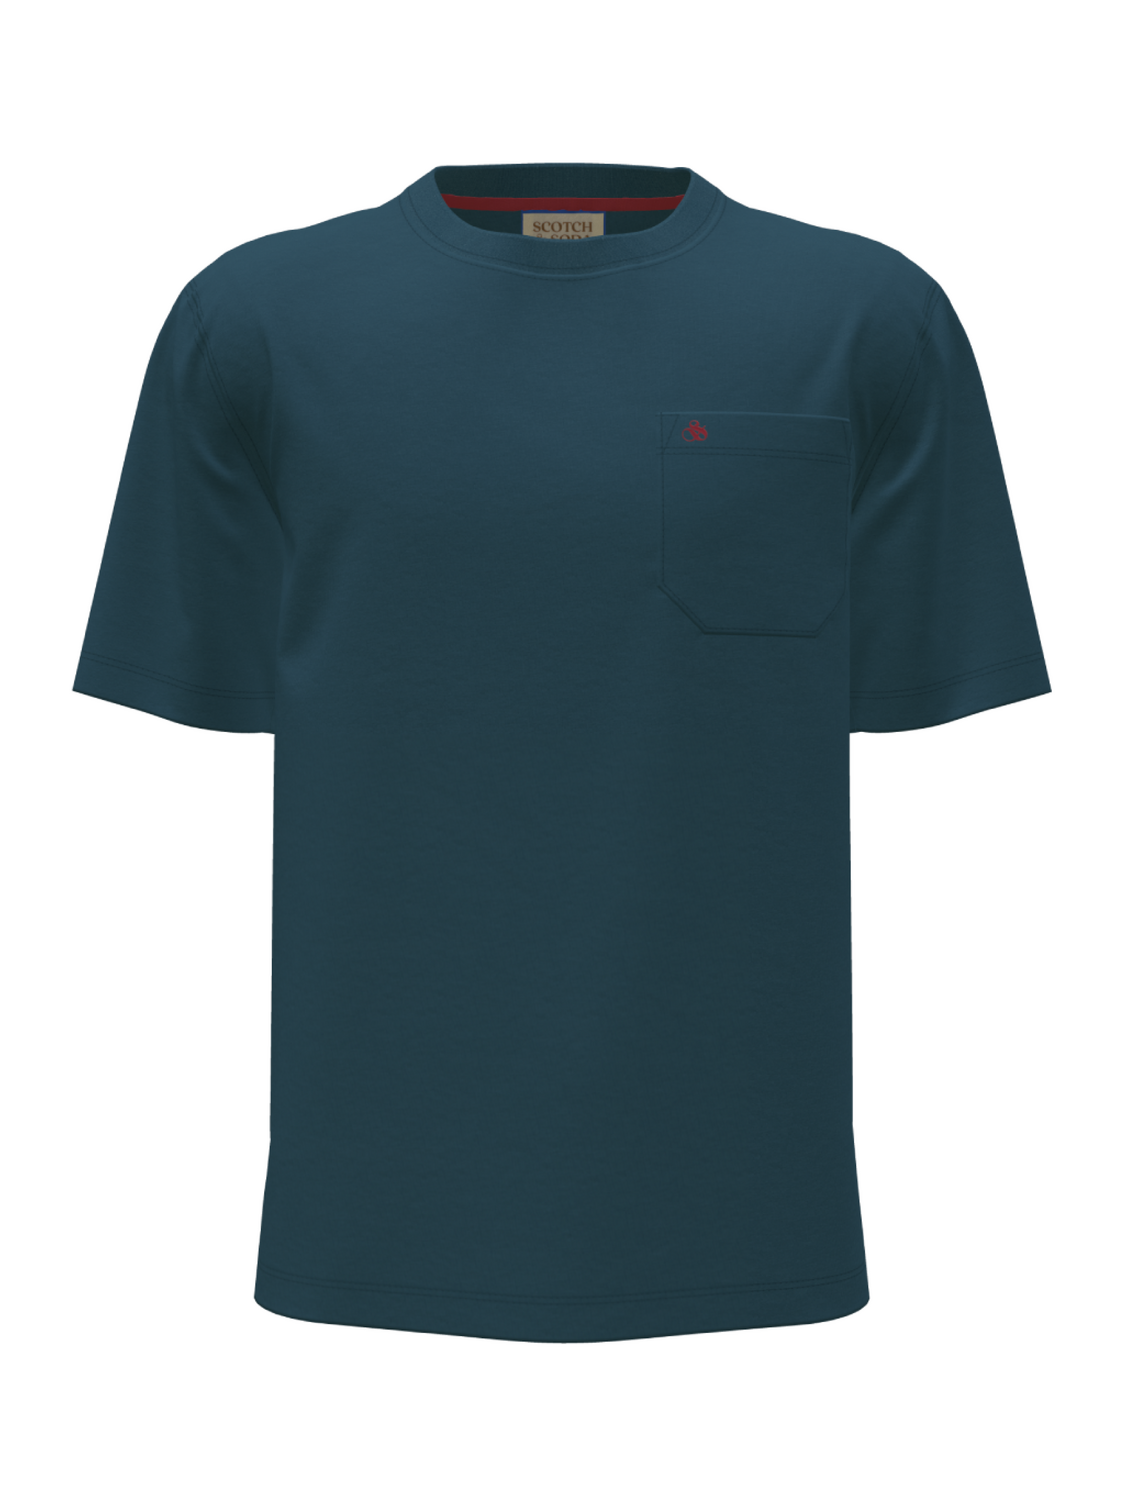 Scotch&Soda CHEST POCKET JERSEY T-SHIRT in Harbour Teal 